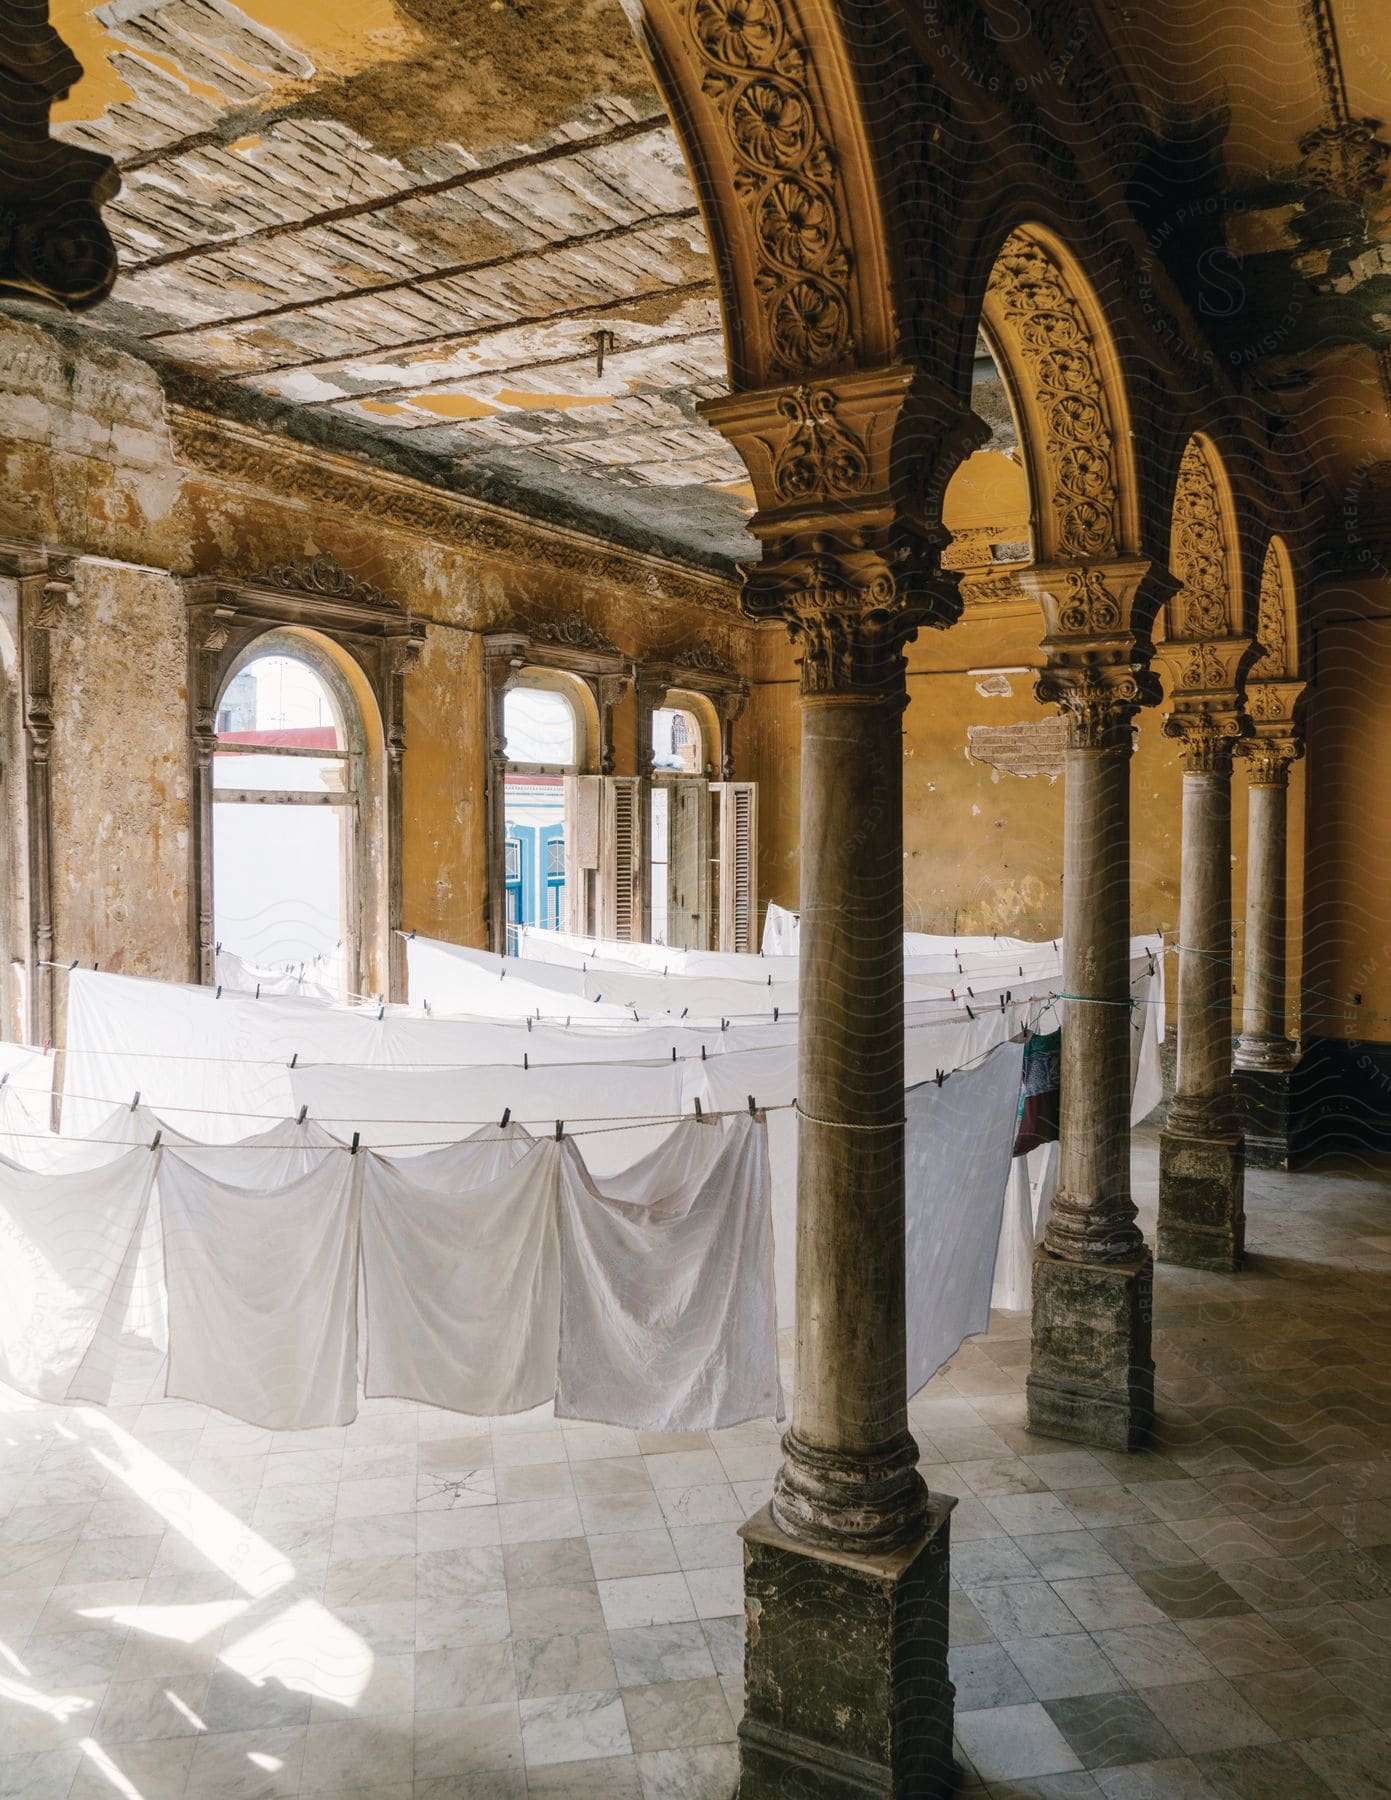 Bed sheets hanging to dry in a room inside a classical style building